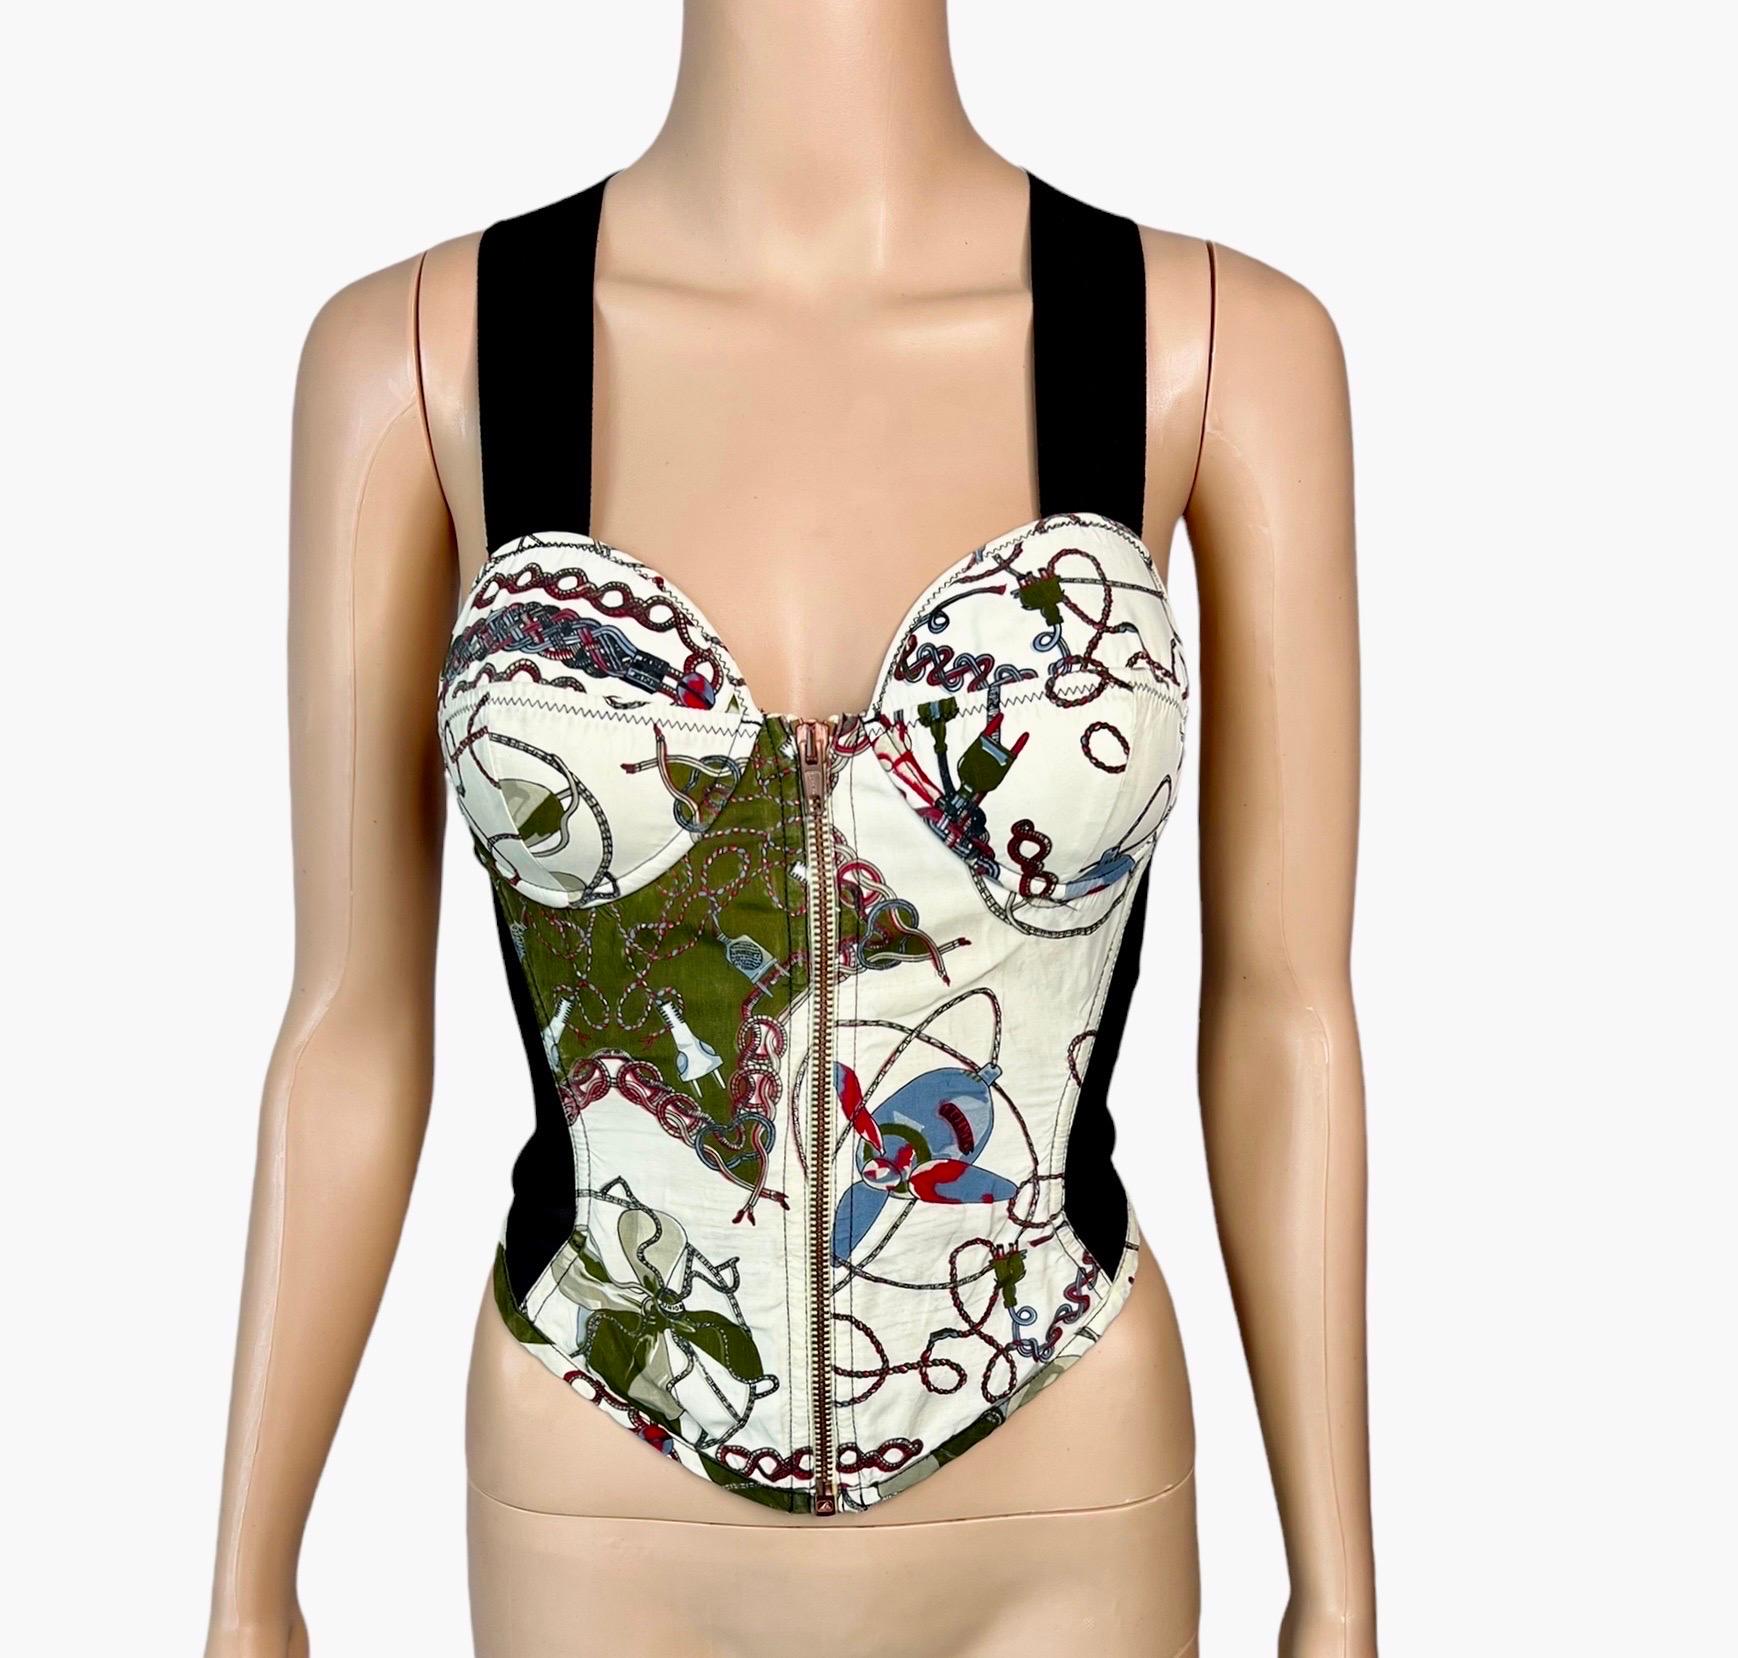 Jean Paul Gaultier Vintage S/S1991 Cone Bra Bustier Sheer Side Panels Corset Top In Good Condition For Sale In Naples, FL